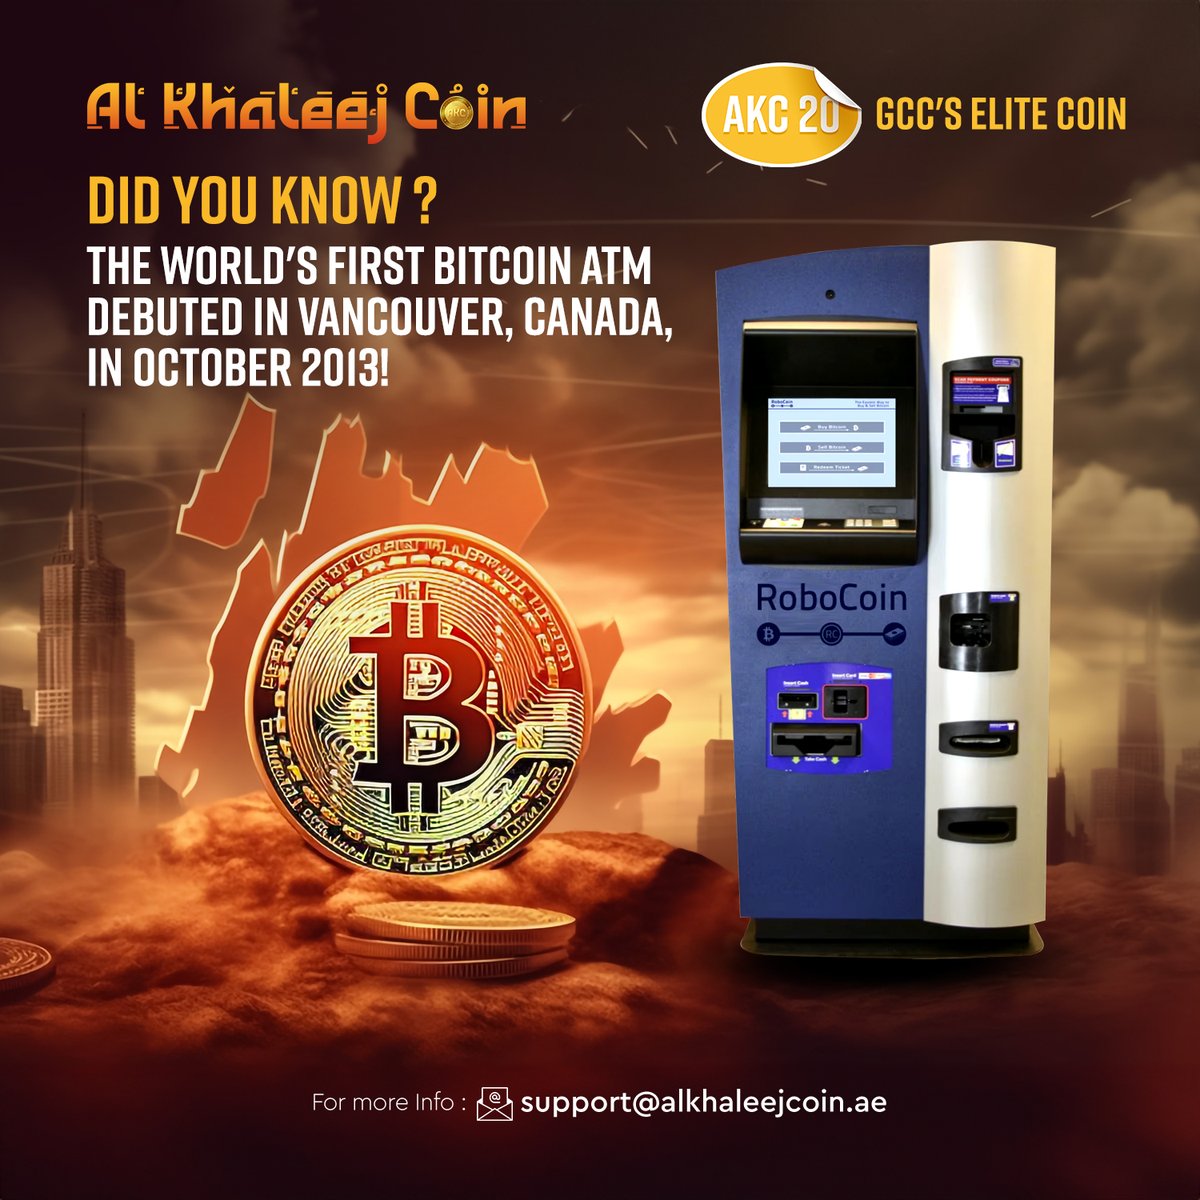 Fun Fact Alert! Did you know? The world's first Bitcoin ATM made its debut in Vancouver, Canada, back in October 2013! 🚀💰 #Bitcoin #CryptoHistory #Vancouver #akc #alkhaleejcoin #gcccoin #elitecoin